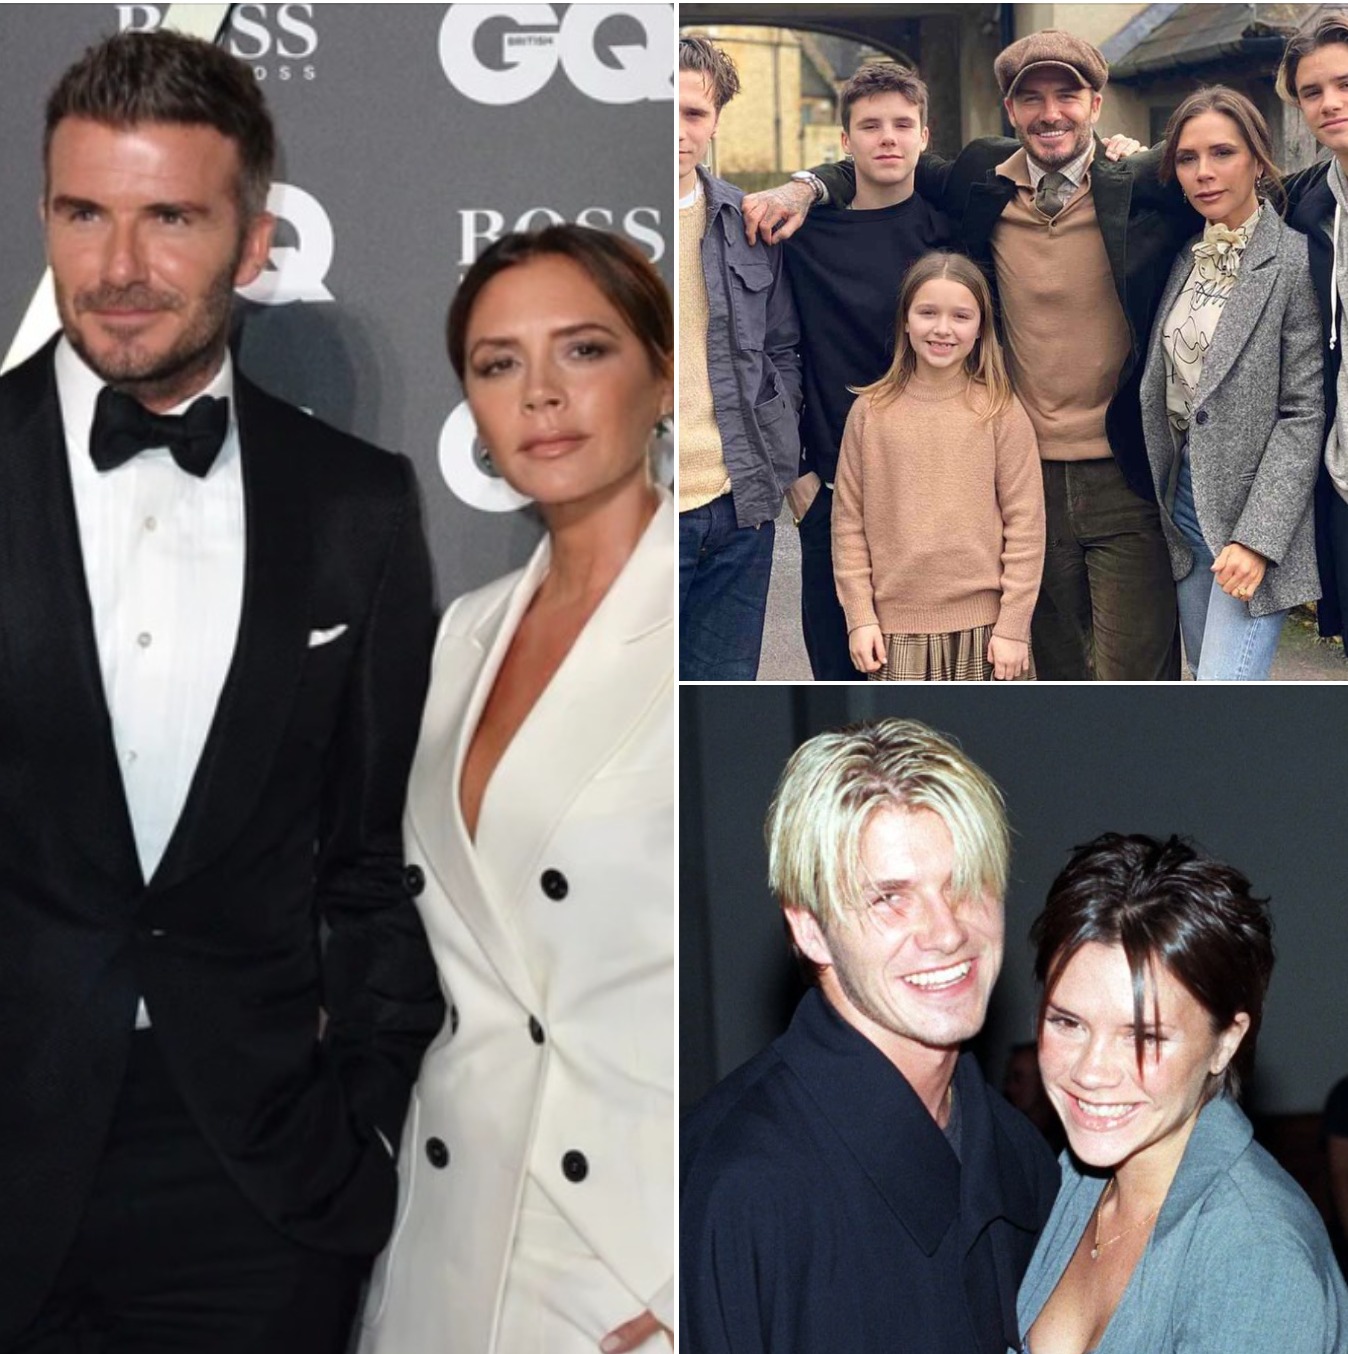 David Beckham shares touching tribute for Victoria Beckham for 50th birthday – fans can’t stop laughing